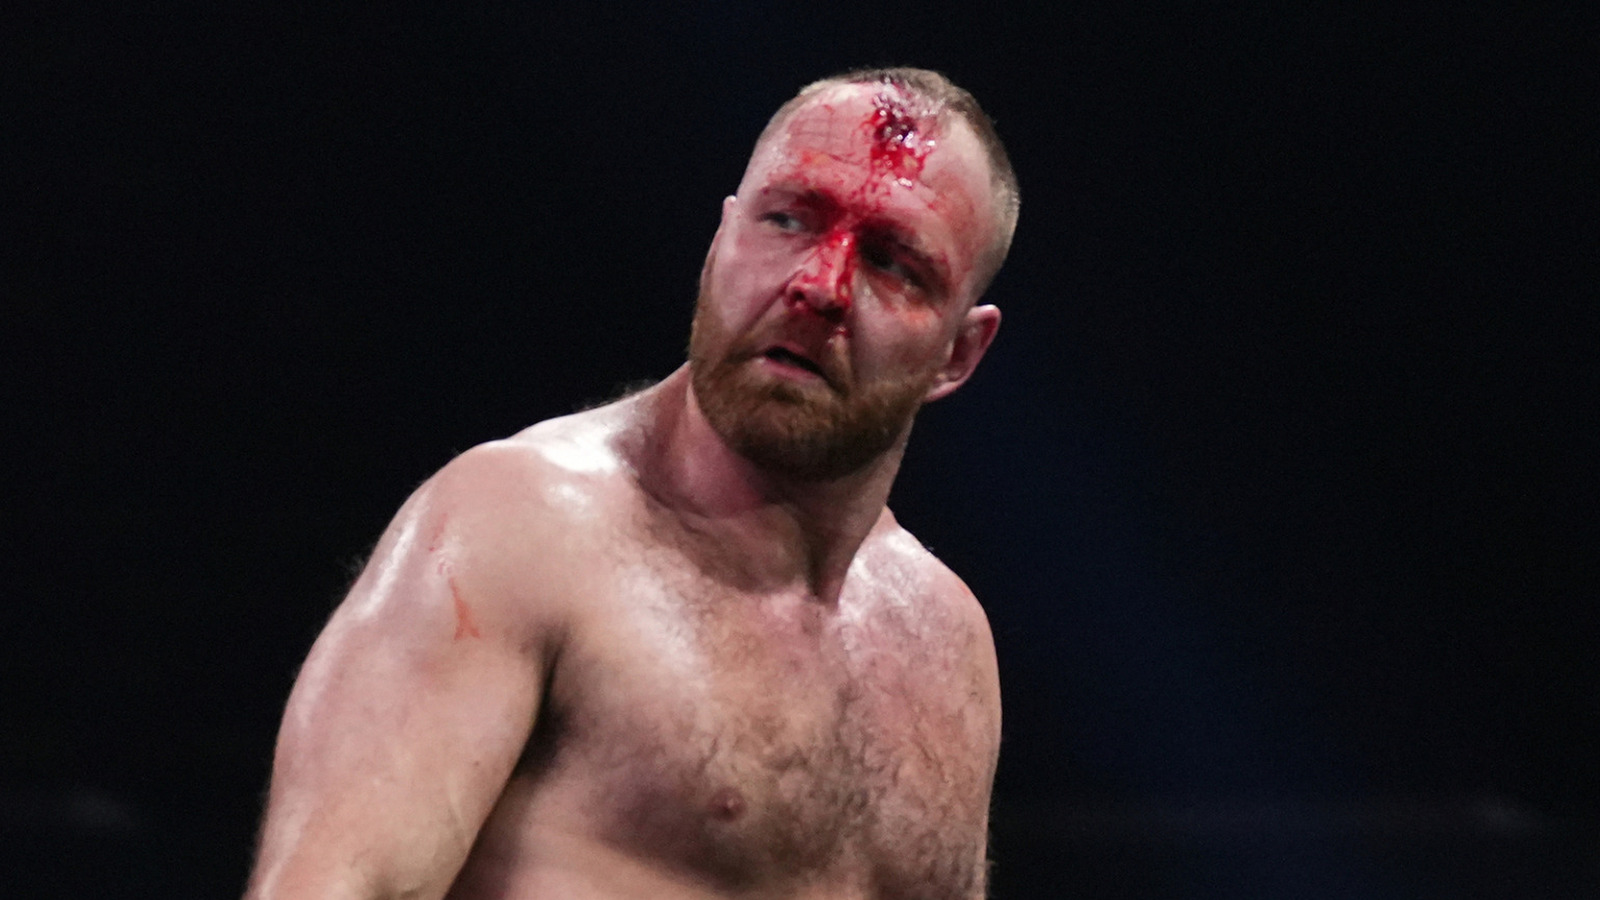 Kevin Sullivan Opens Up About Blood & Blading In Modern Wrestling, AEW's Jon Moxley